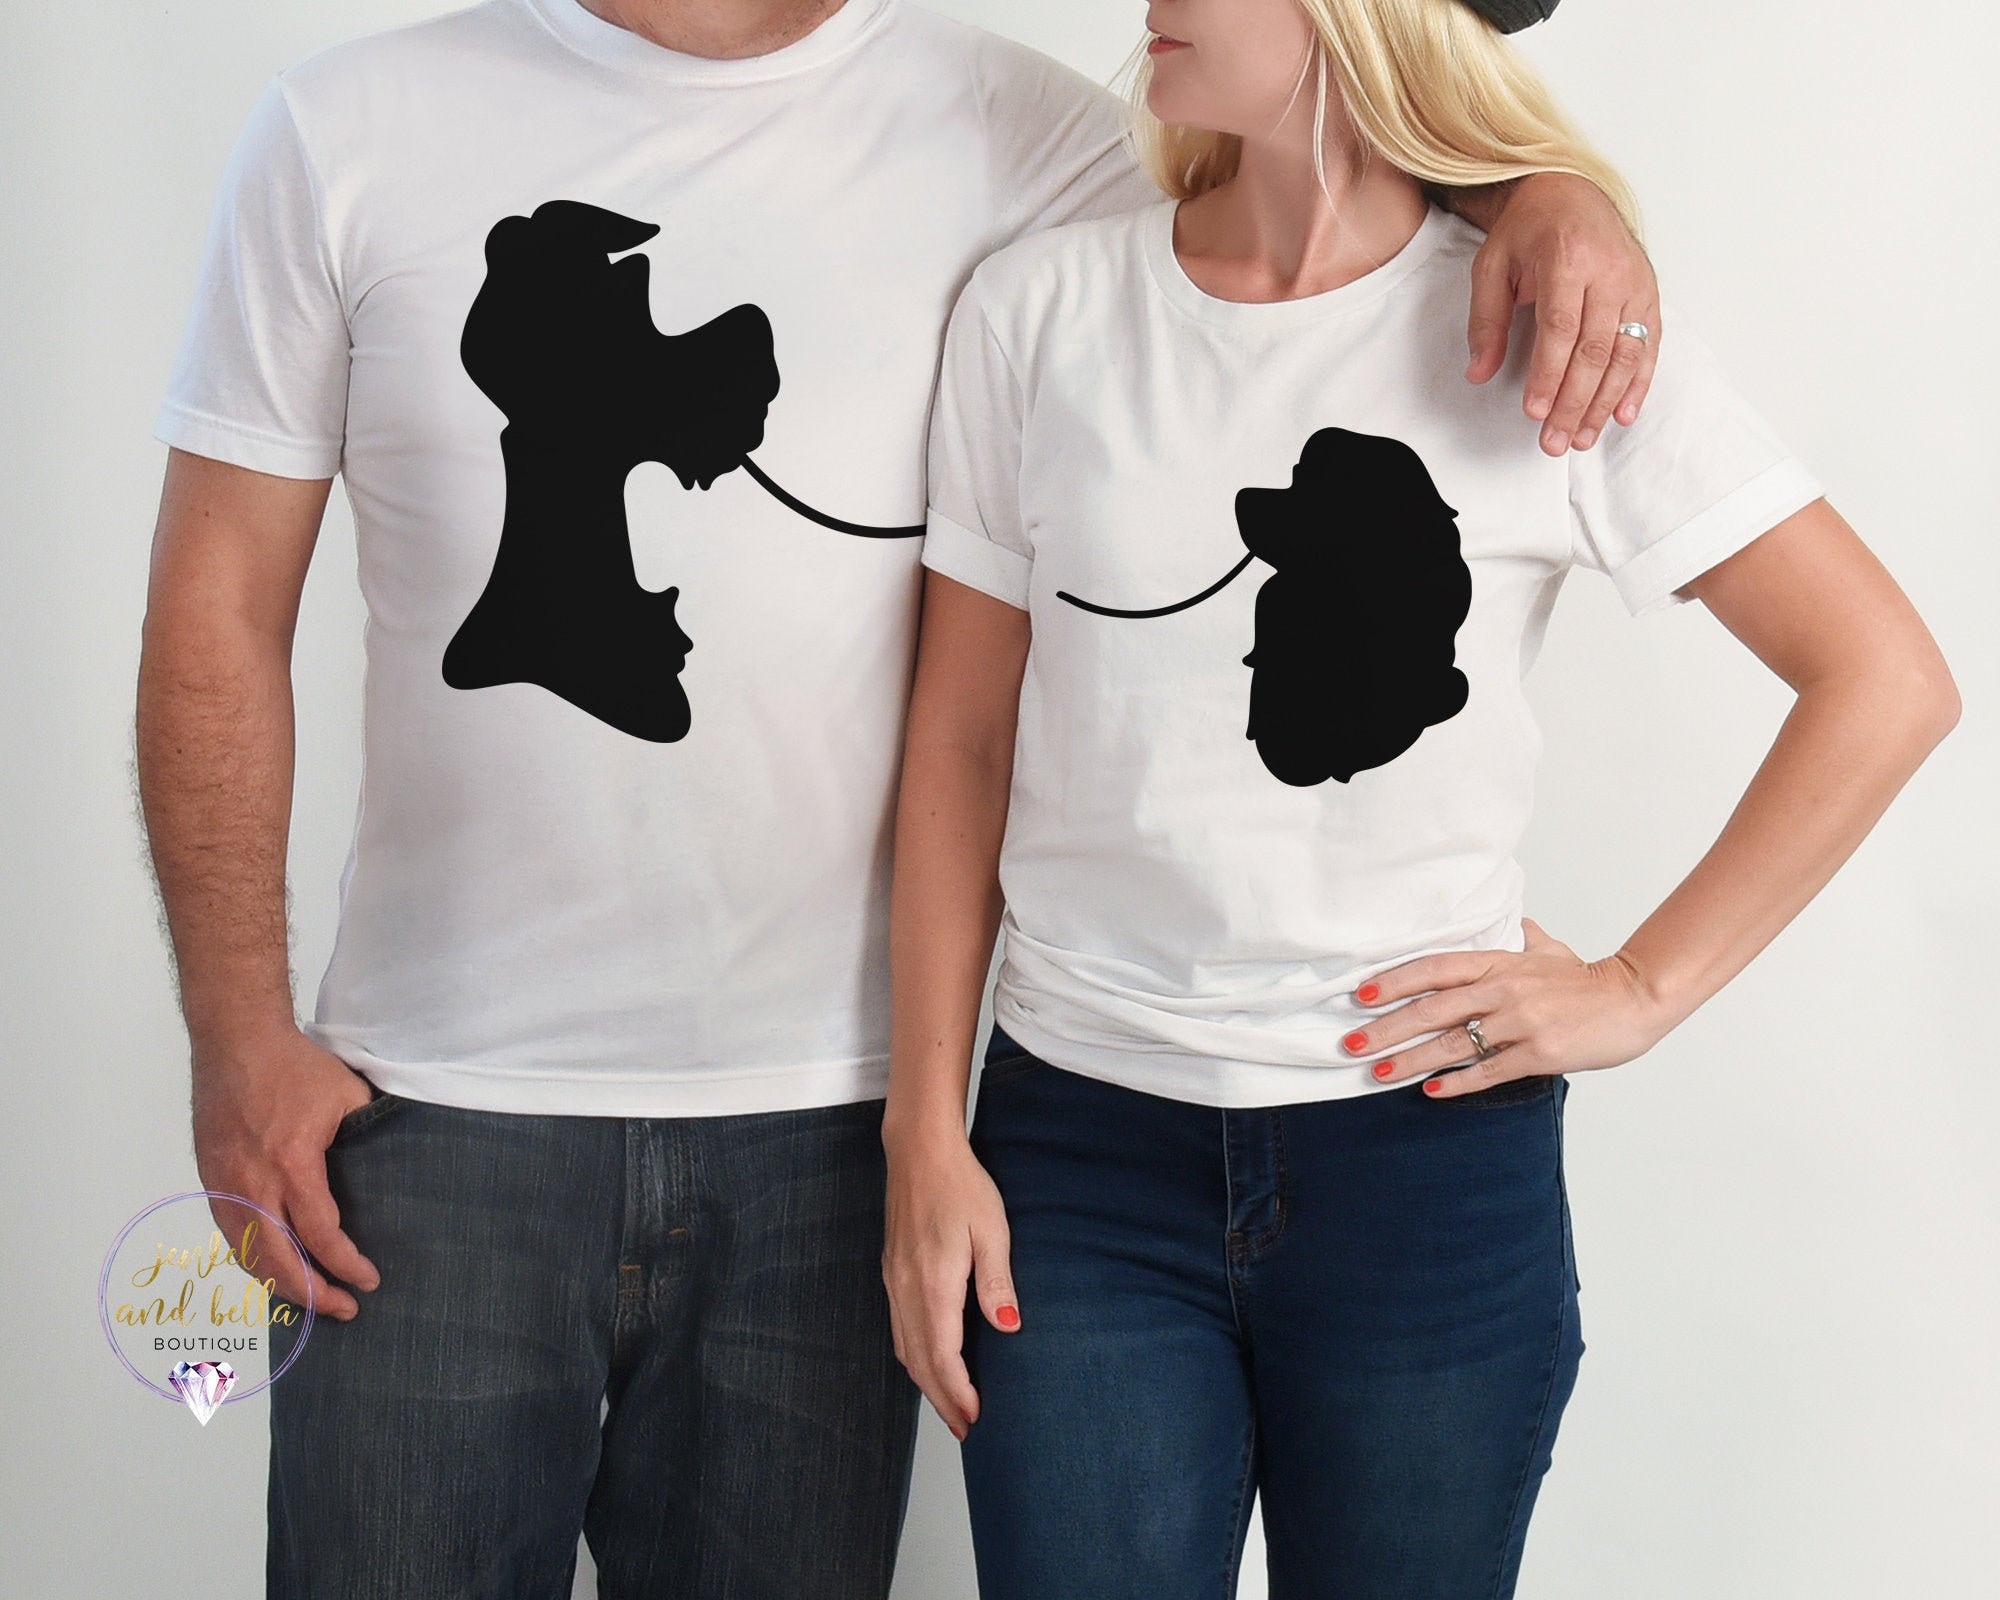 Lady and the Tramp Spaghetti Scene Couples Shirt, Matching Disney Couples Shirts